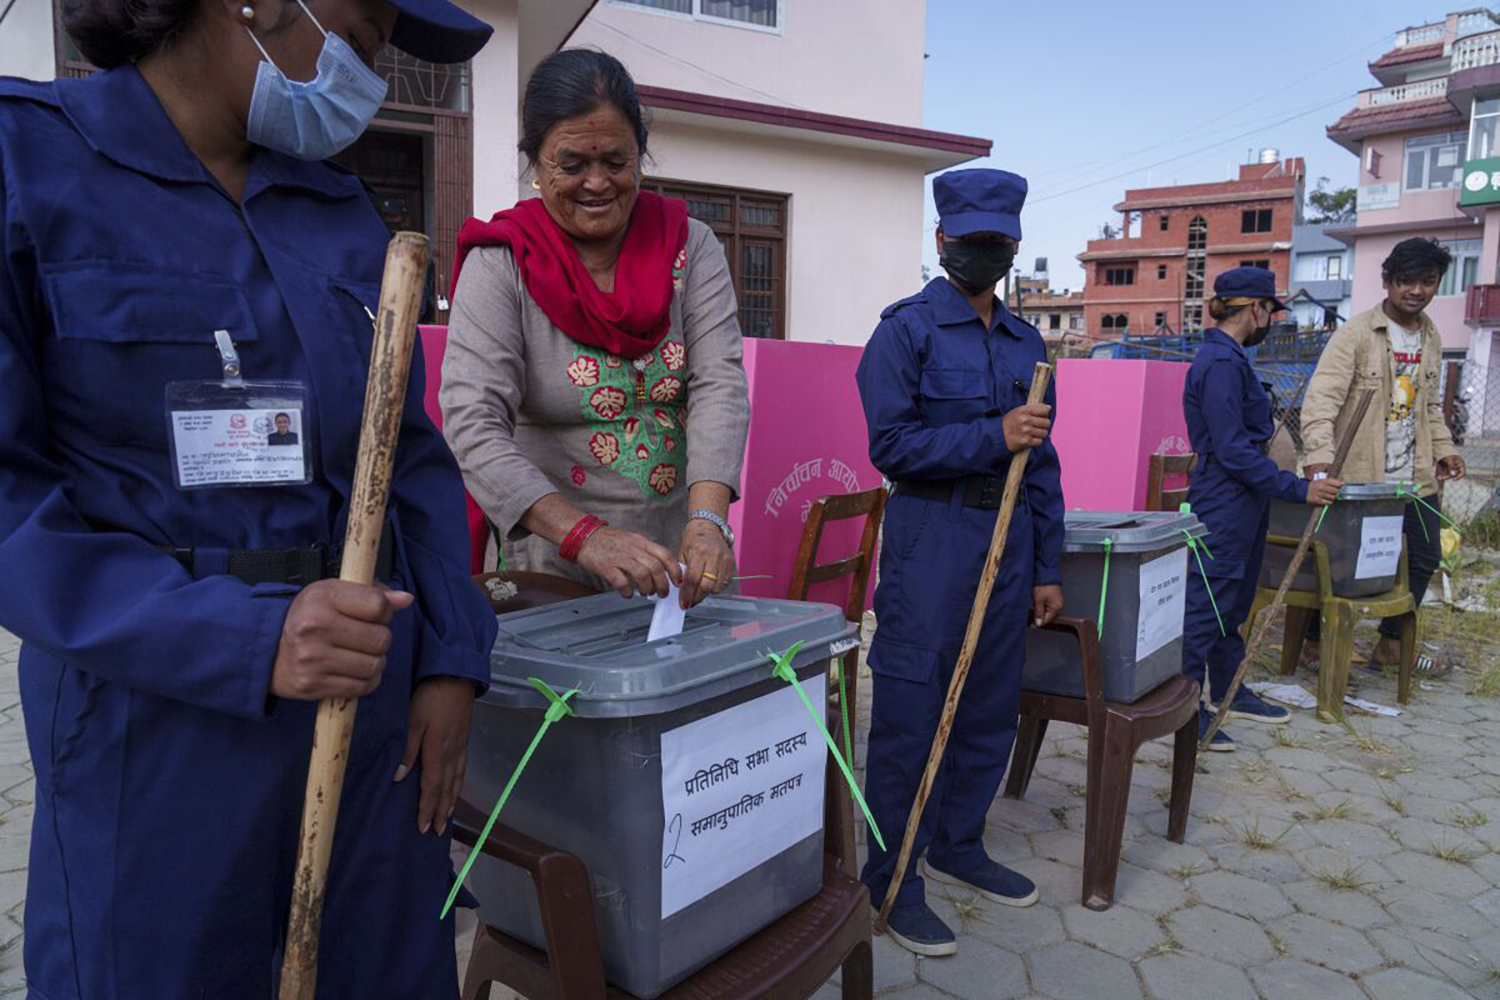 Nepal Election: Final result underway, Congress becomes the largest party with 89 seats